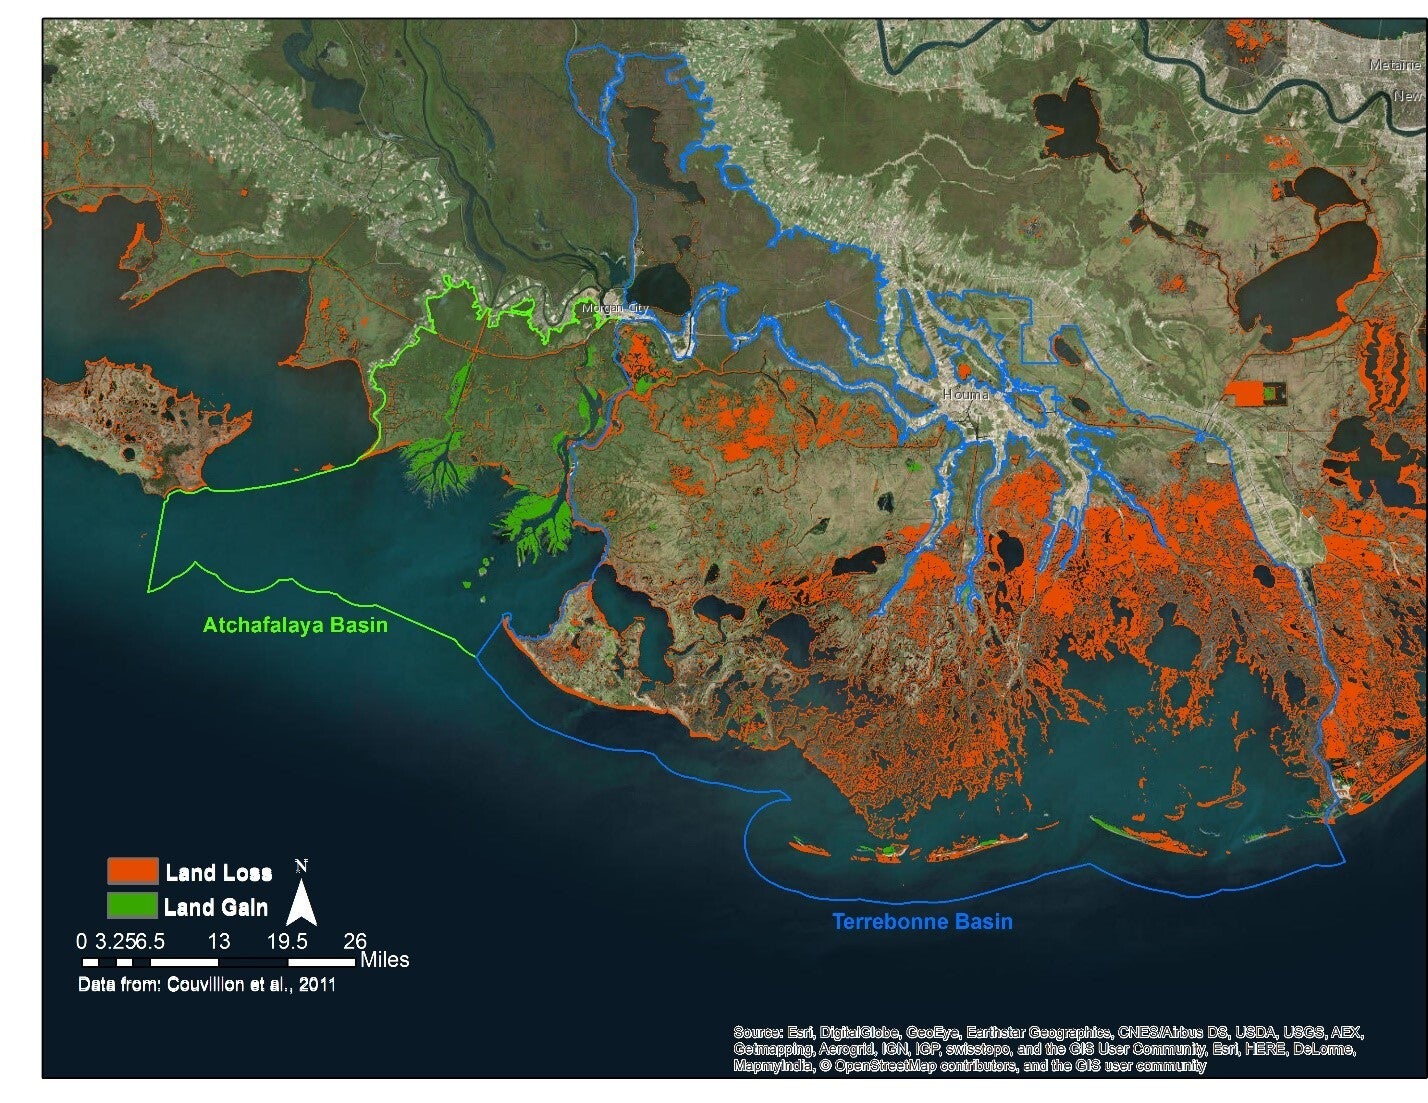 Map of Louisiana's coast depicting land growth in the Atchafalaya Basin and land loss in neighboring Terrebonne Basin